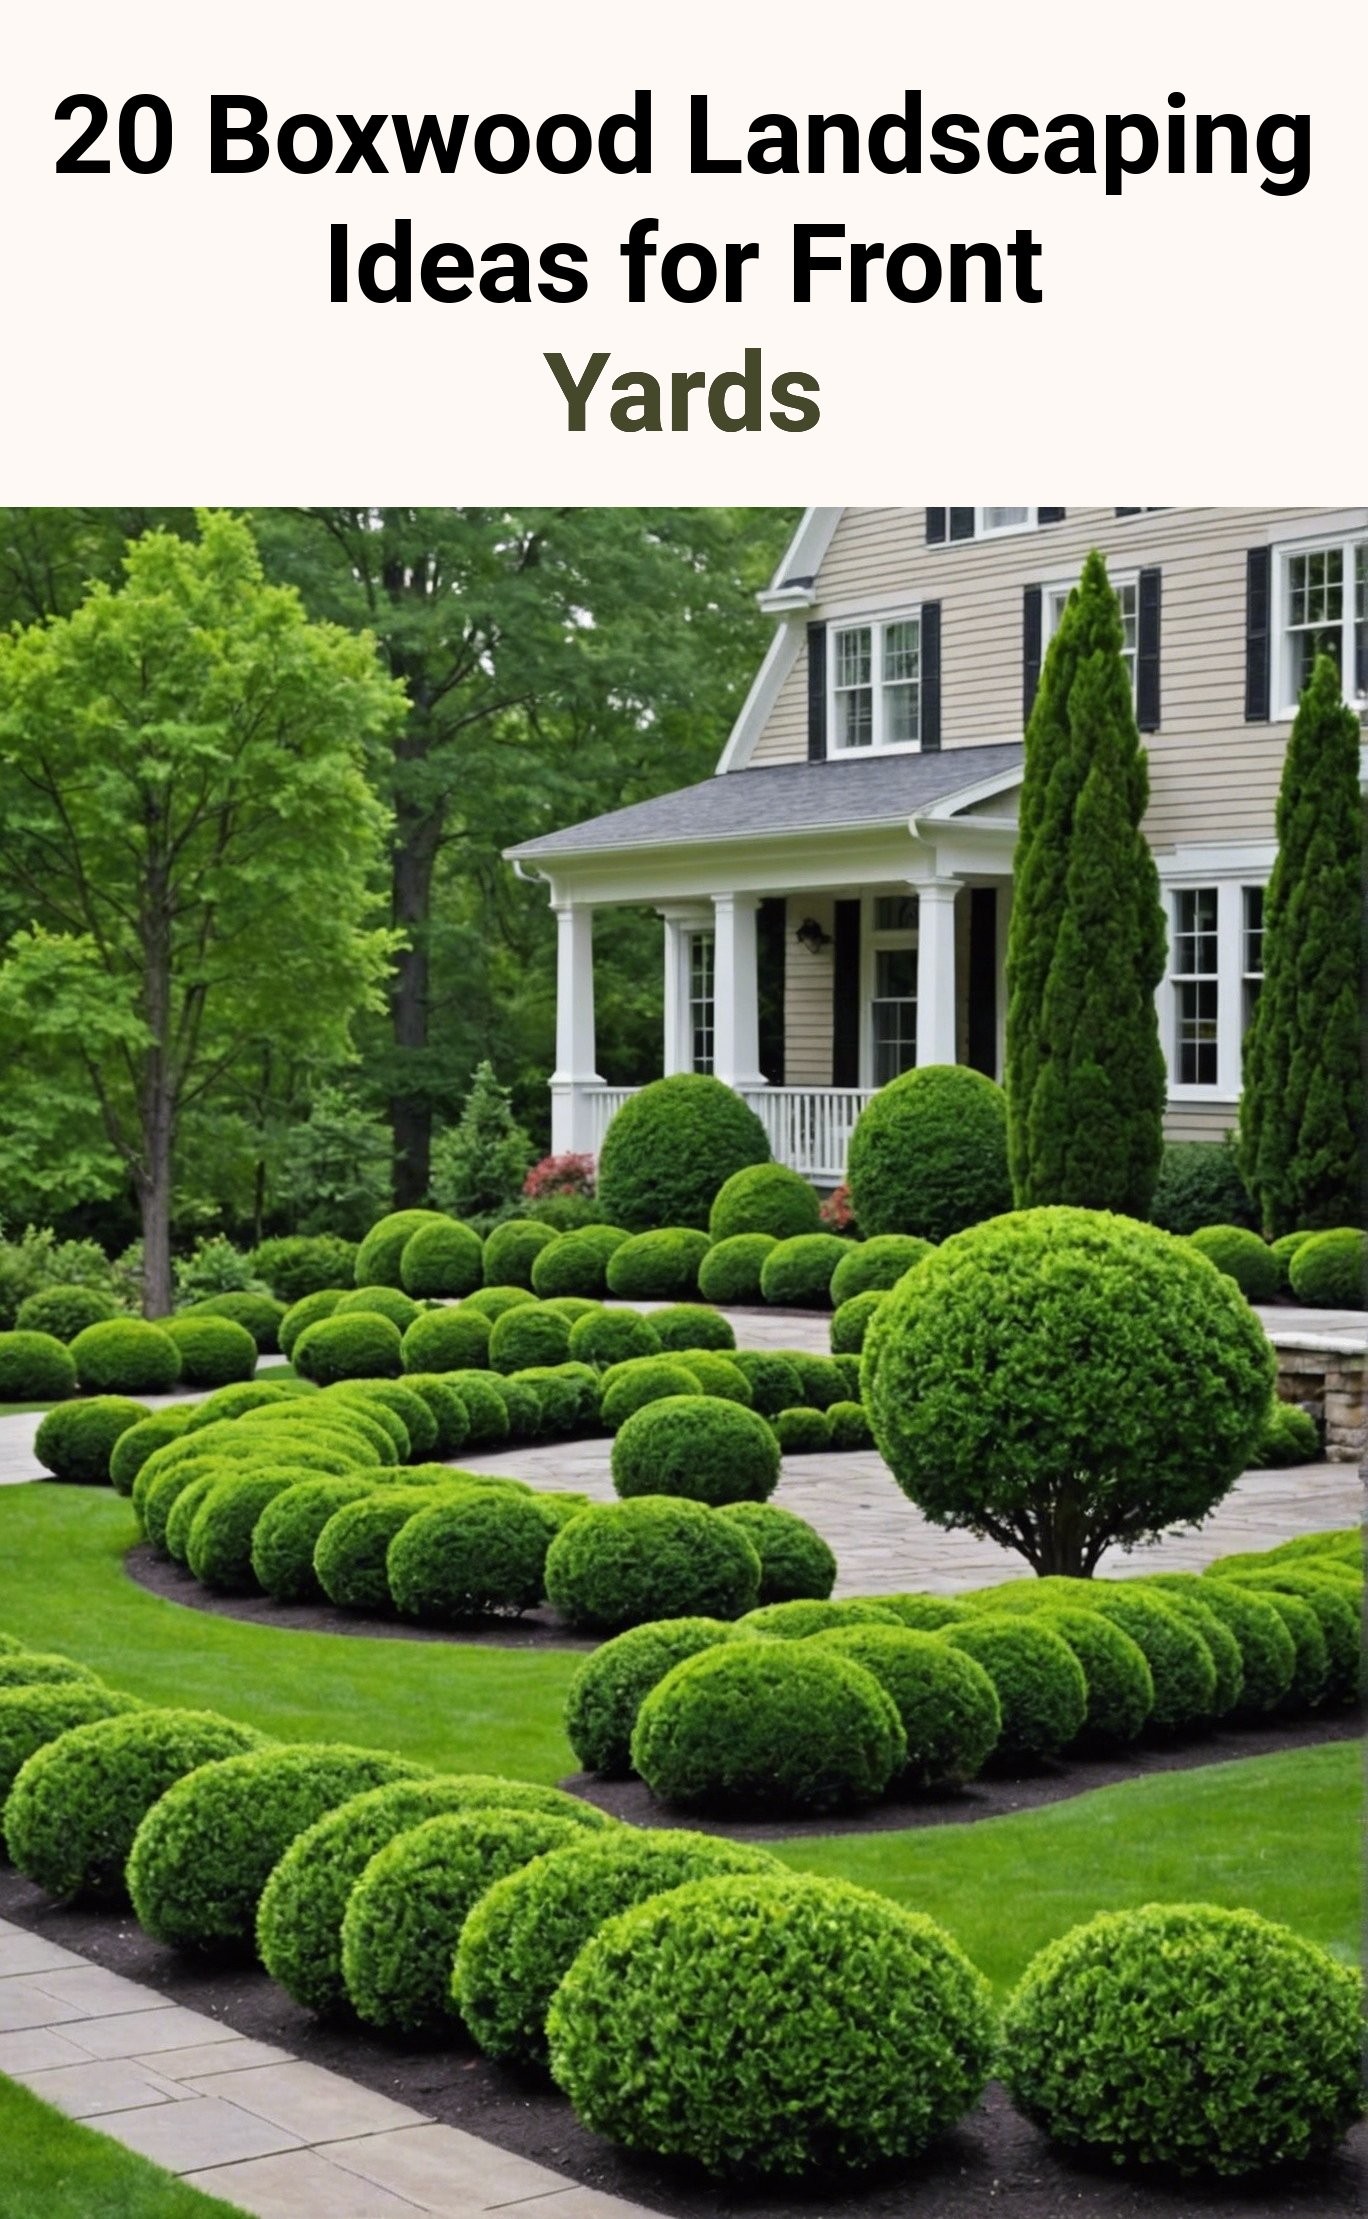 20 Boxwood Landscaping Ideas for Front Yards